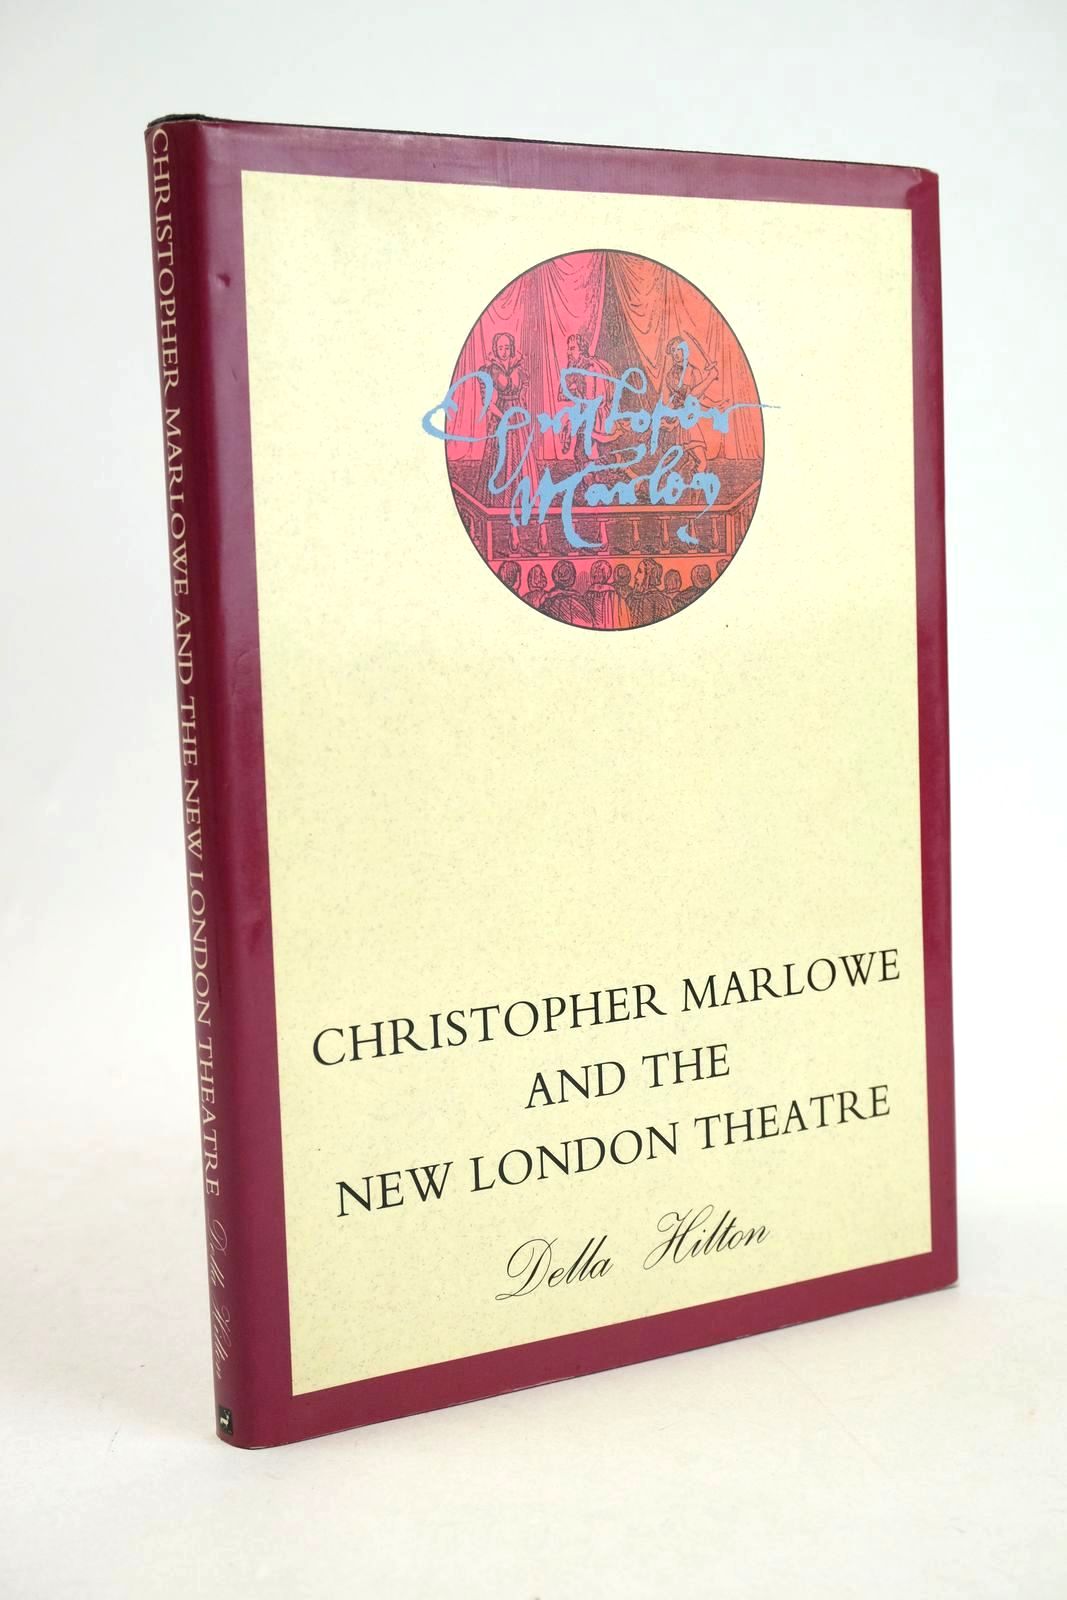 Photo of CHRISTOPHER MARLOWE AND THE NEW LONDON THEATRE- Stock Number: 1327919